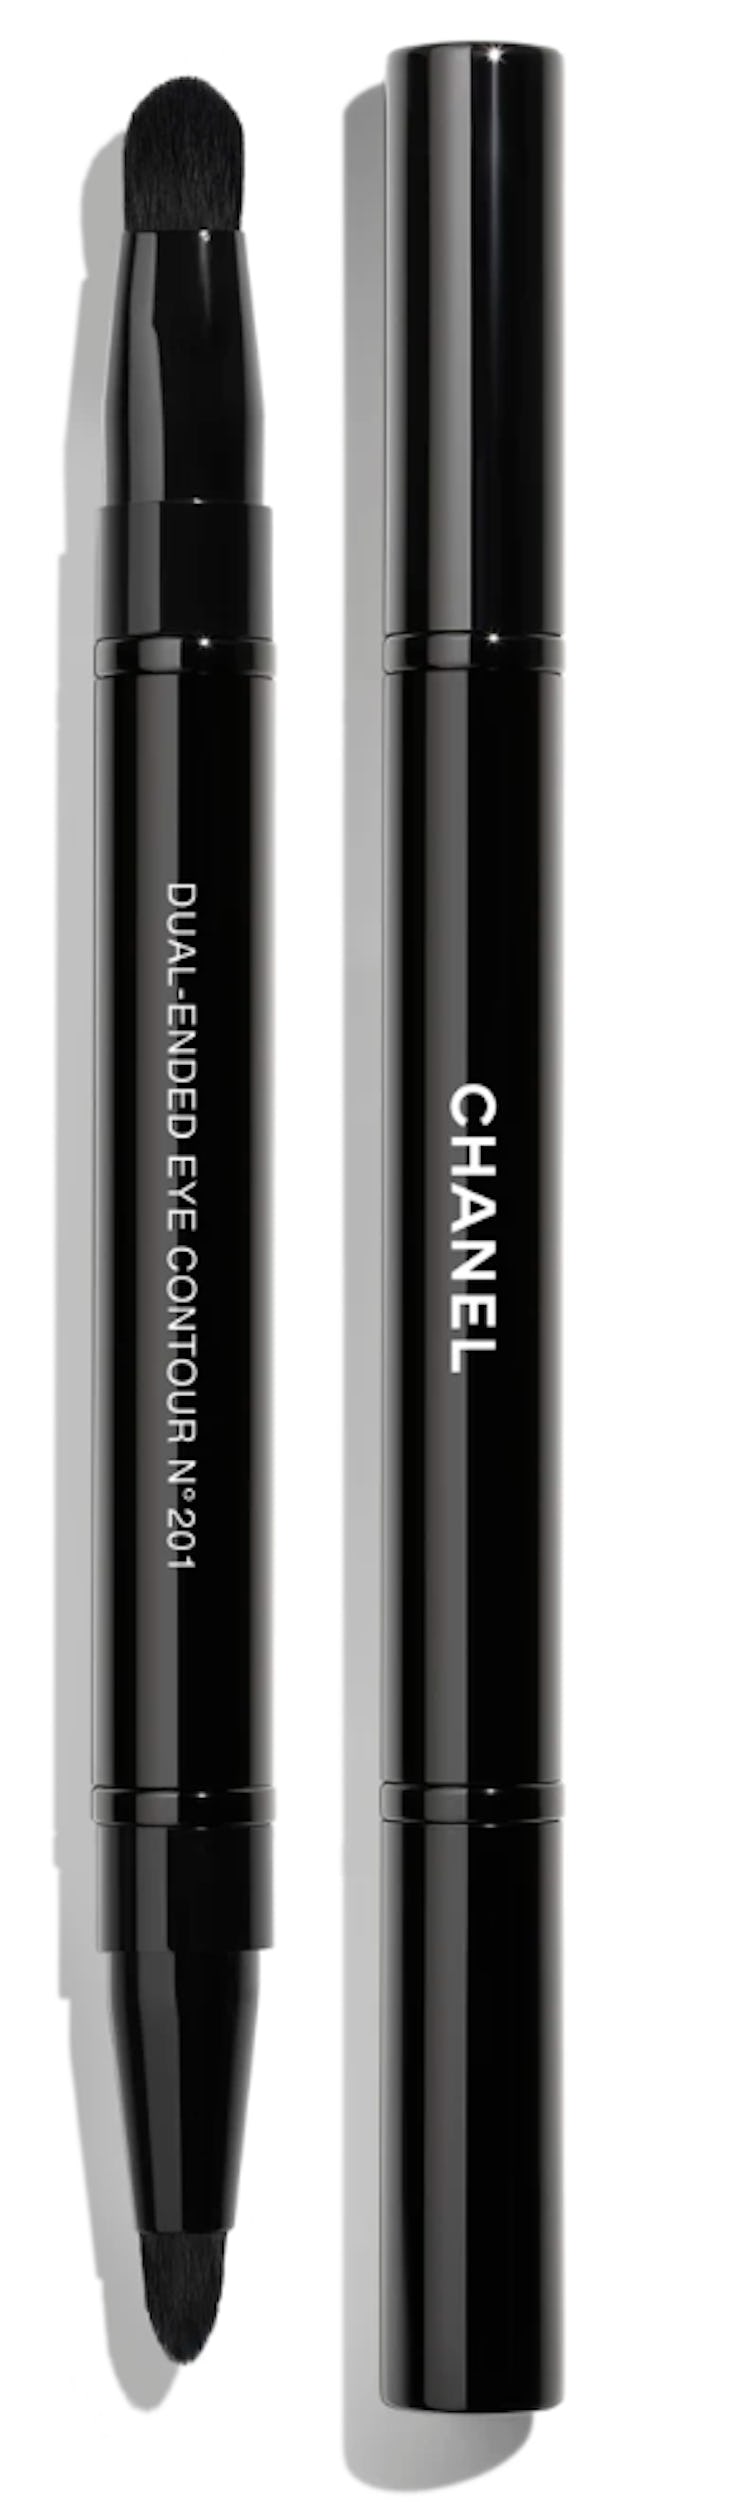 Chanel Retractable Dual-Ended Eye-Contouring Brush N°201 for makeup brushes